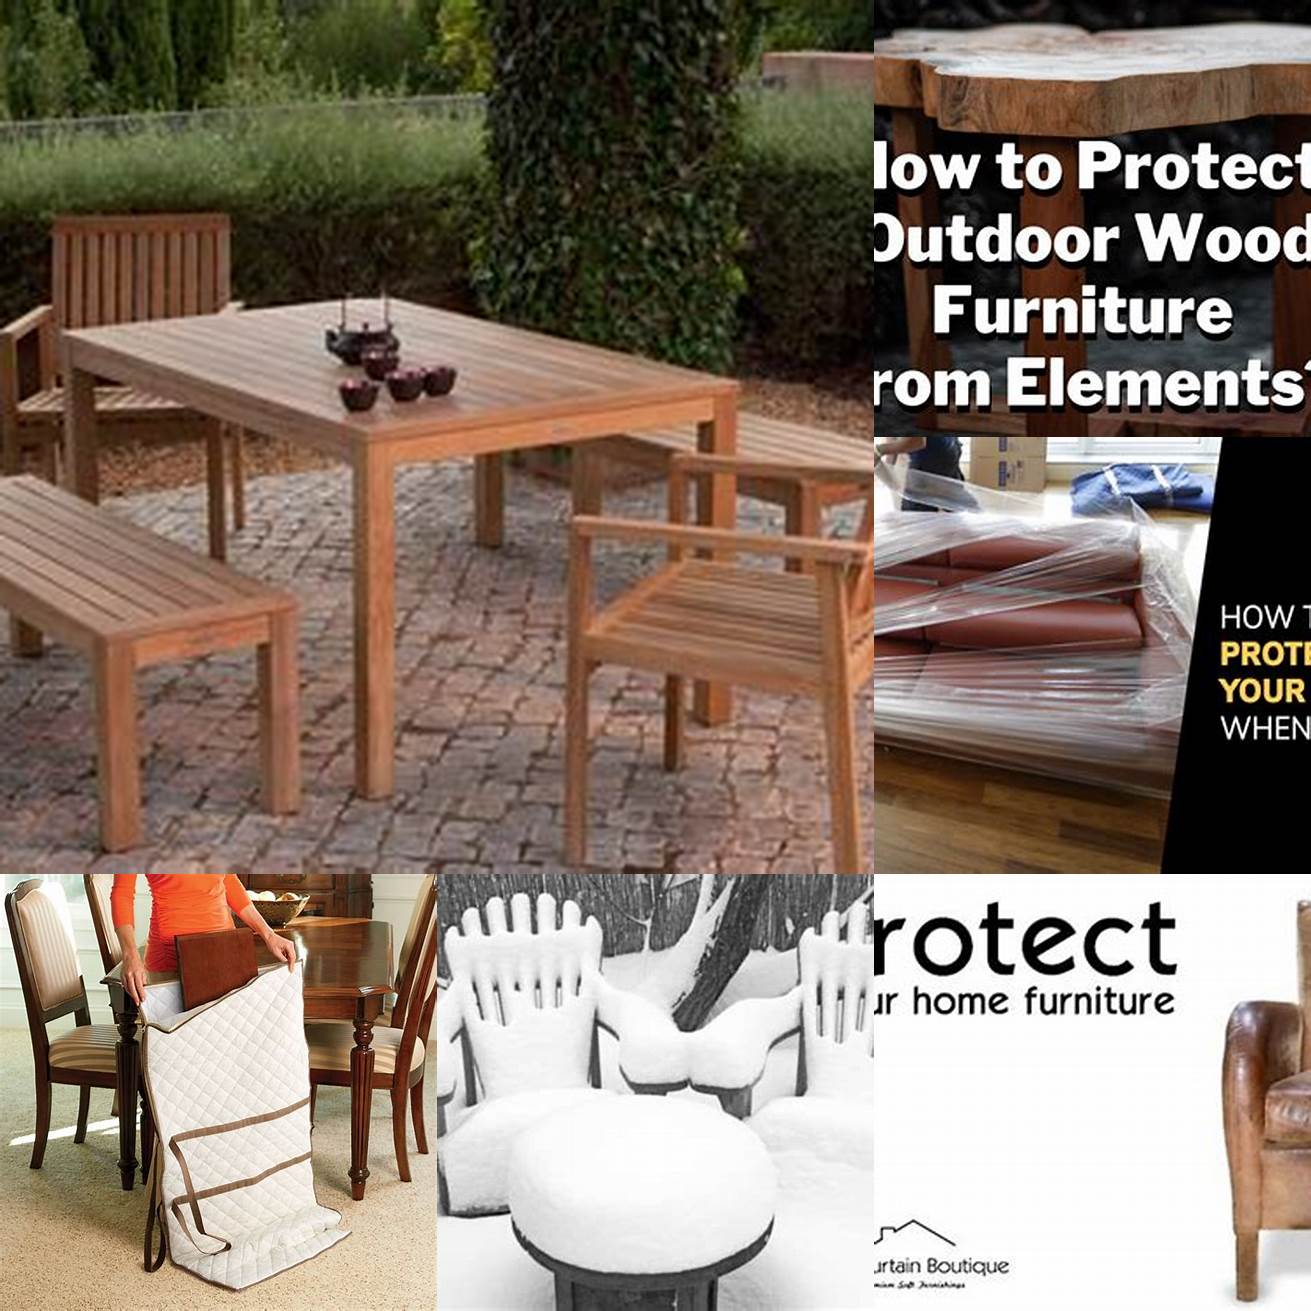 Protect your furniture from the elements